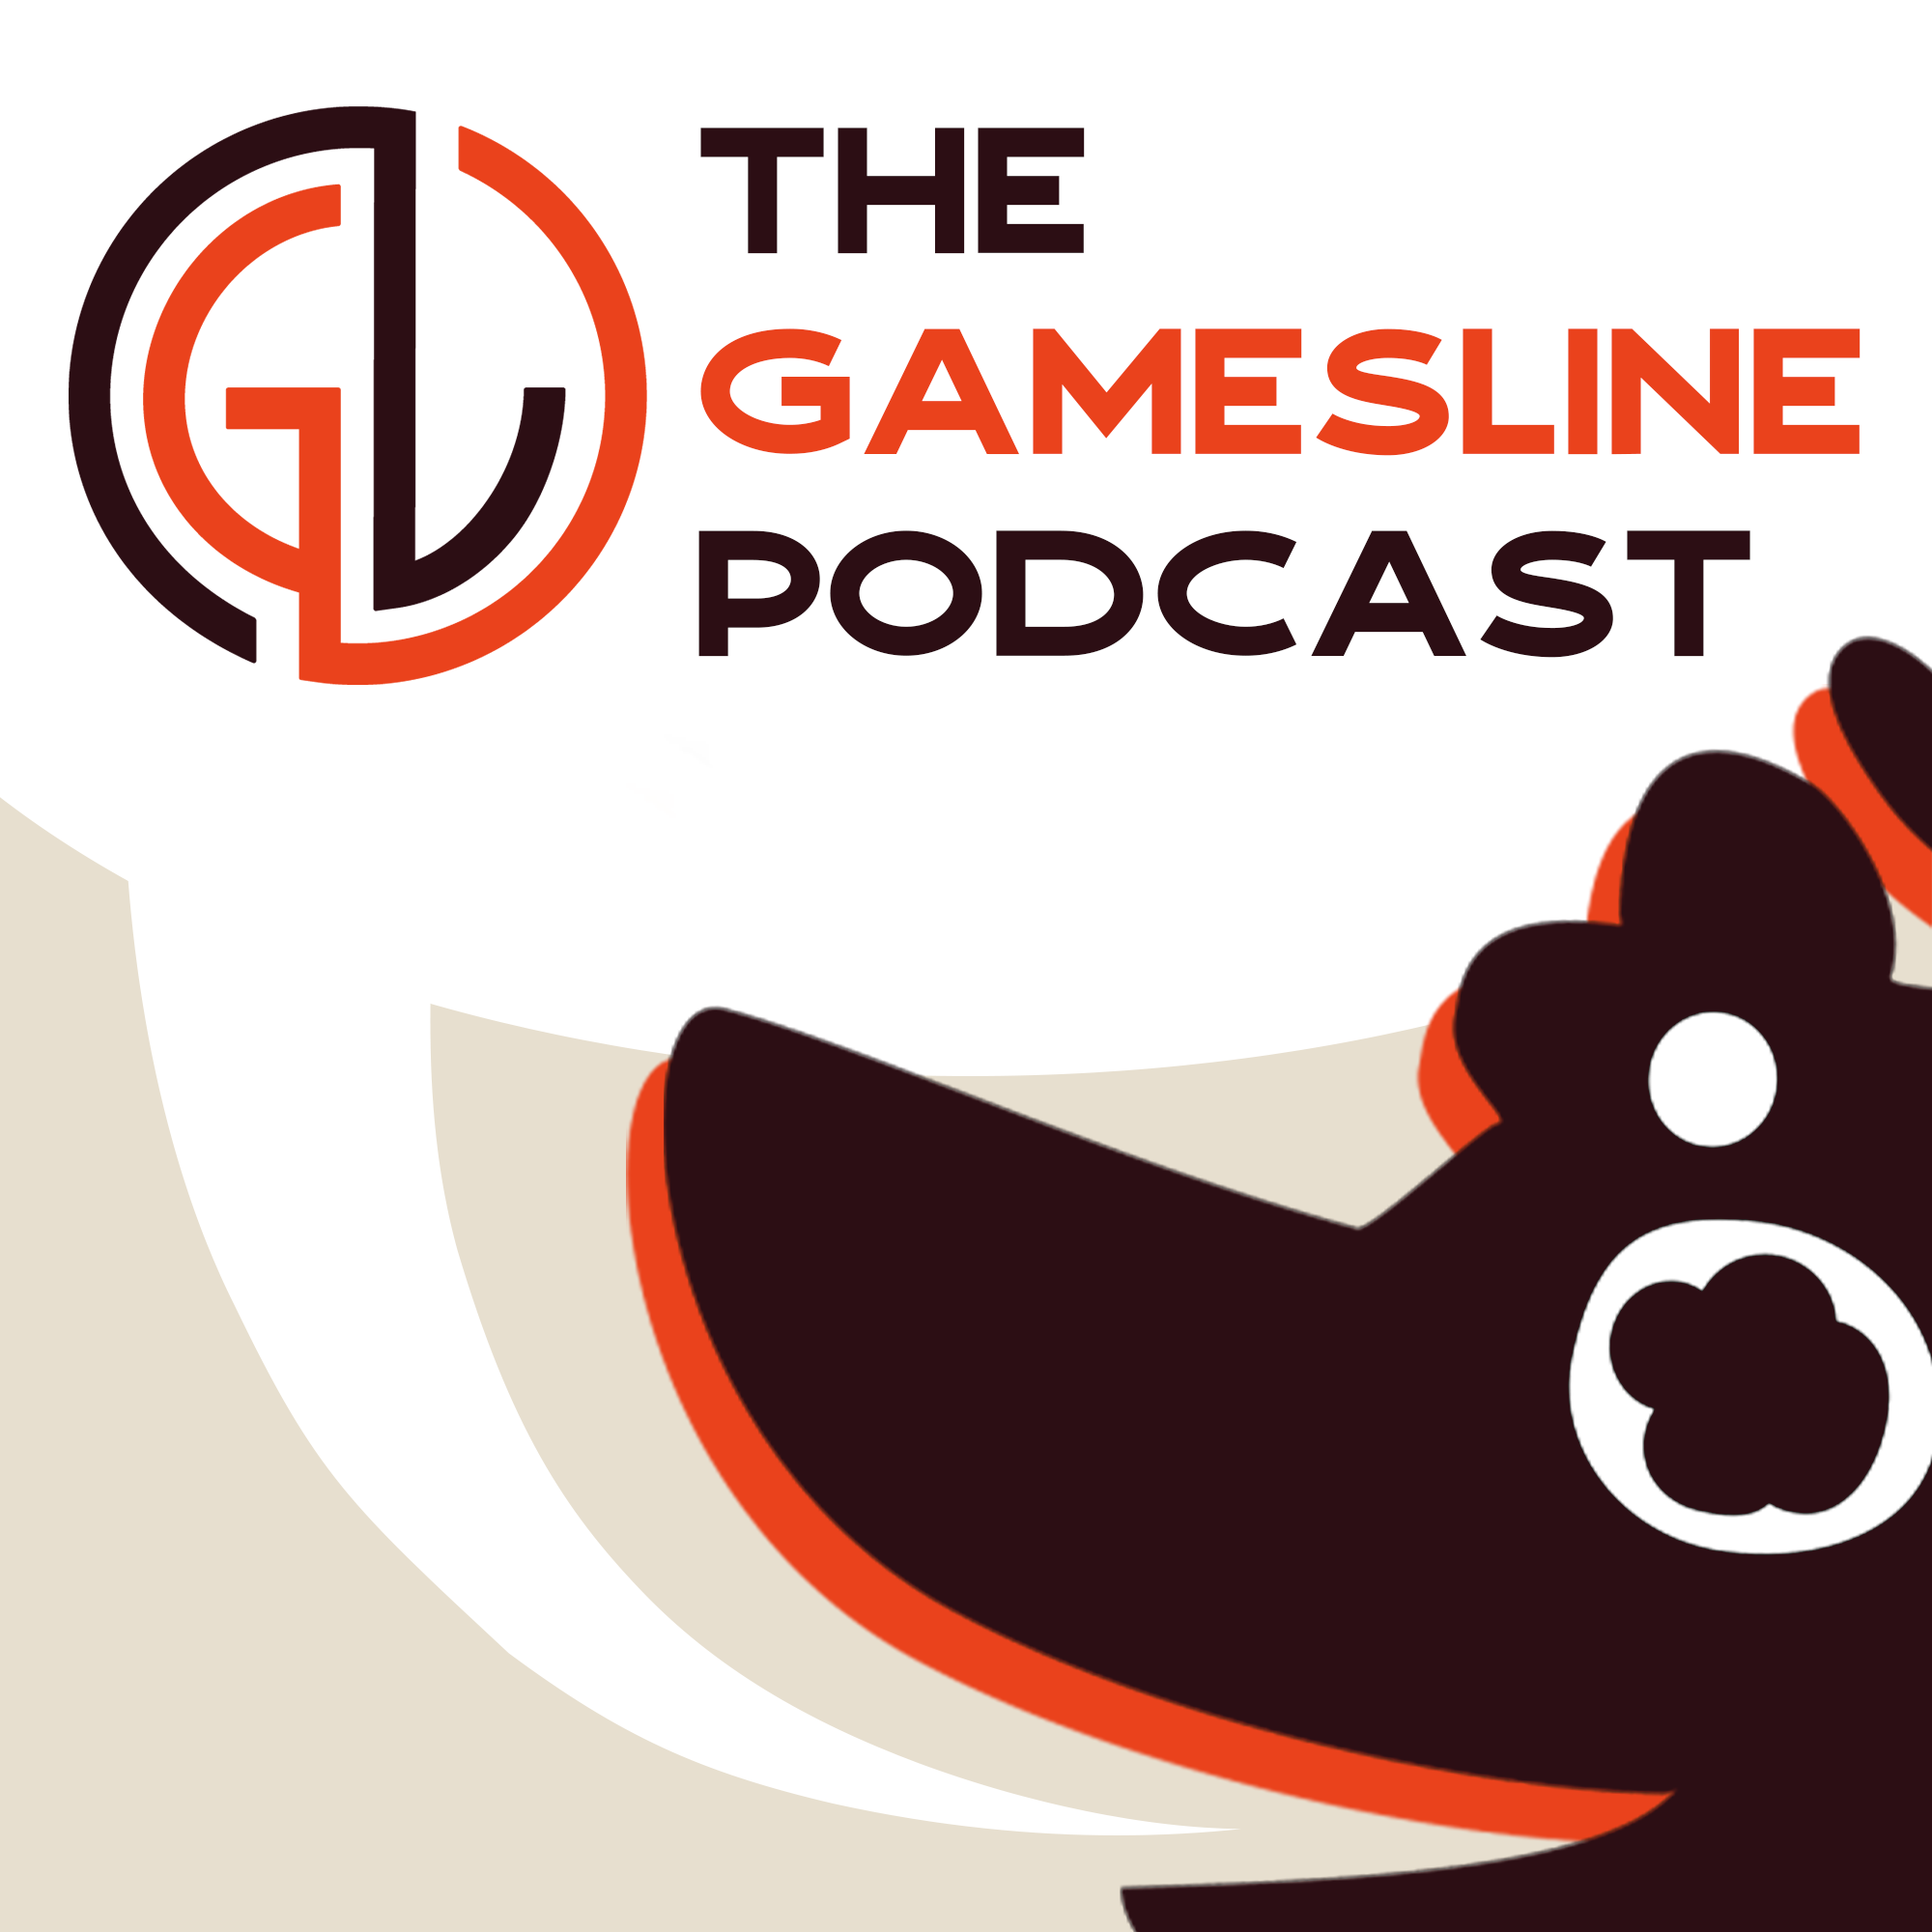 A cartoon dog with its mouth slightly ajar. A speech bubble emerges from its mouth, with the words "The Gamesline Podcast" in it, and a graphic logo accompanying the words.